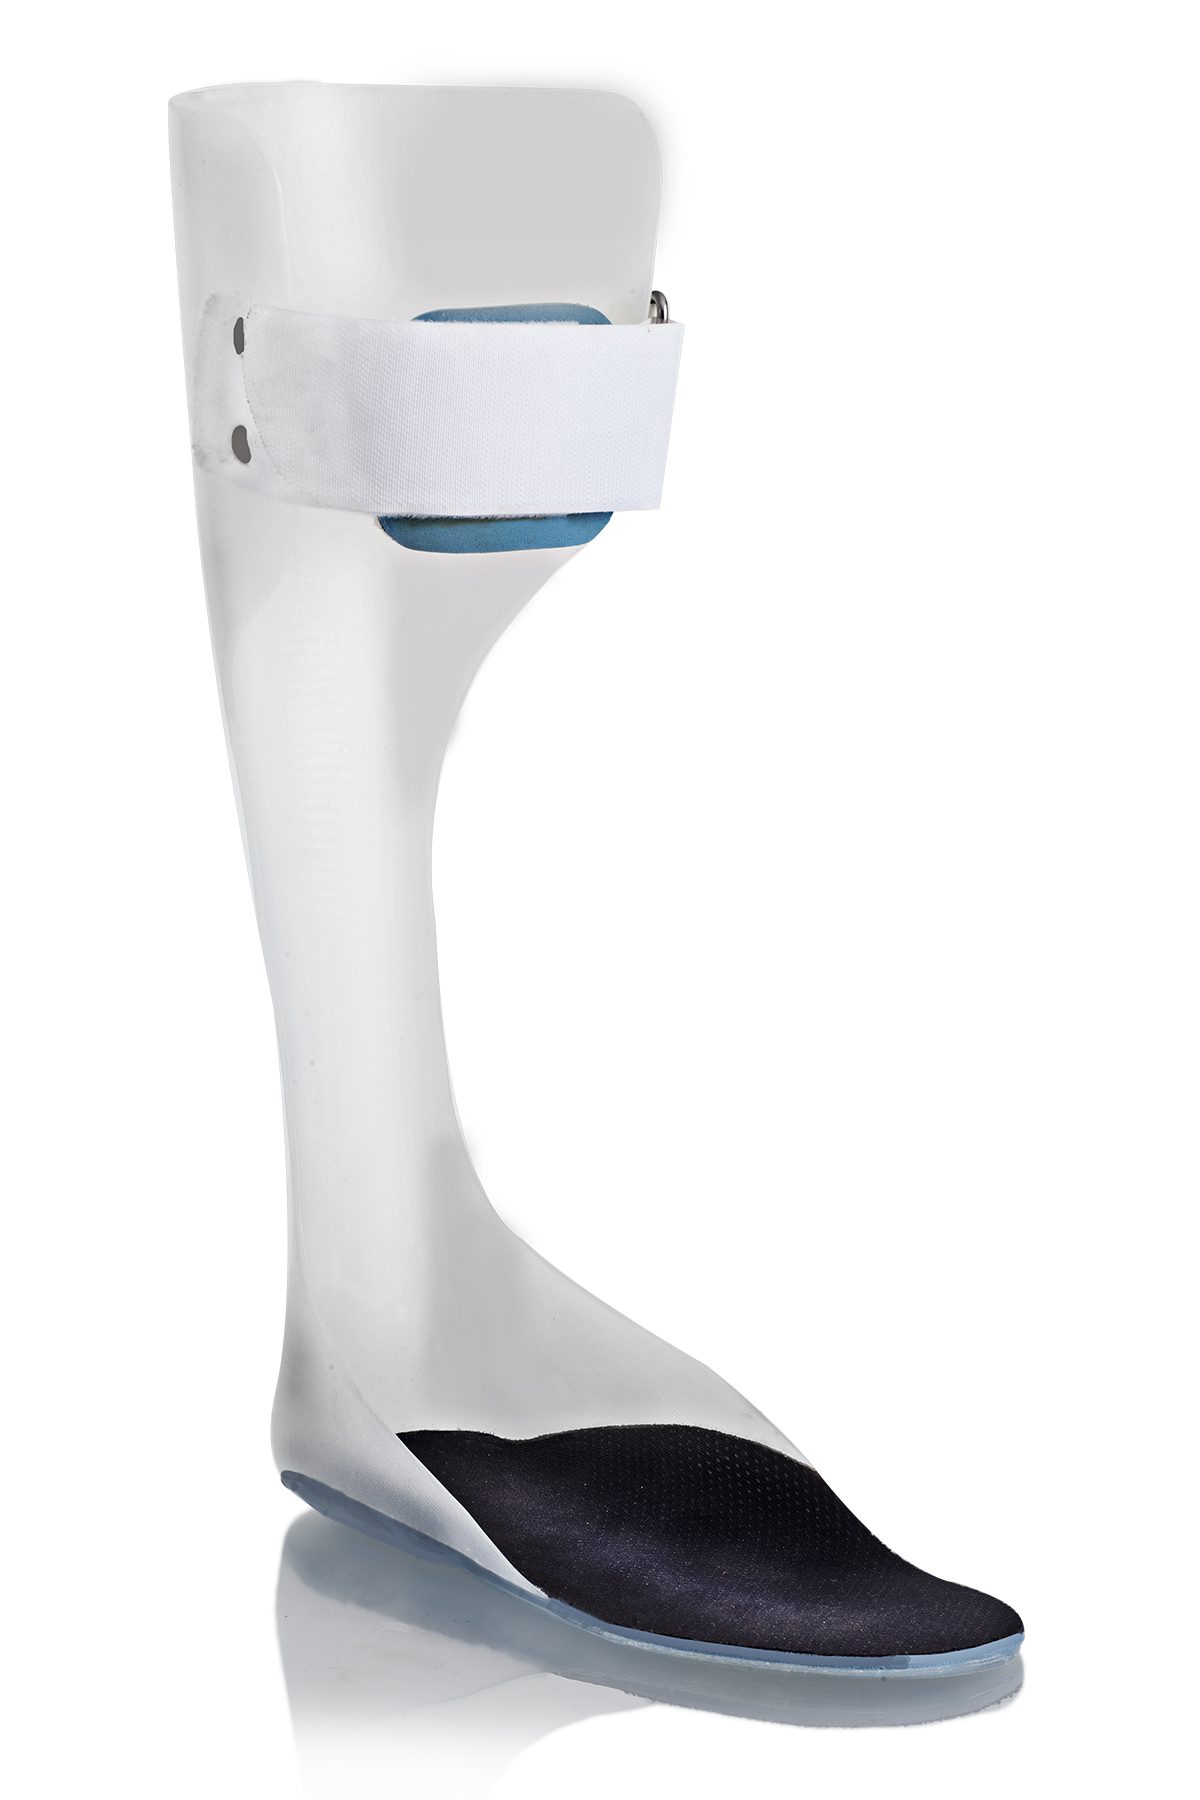 Semi-Solid Ankle Foot Orthosis Drop Foot Brace – The Therapy Connection